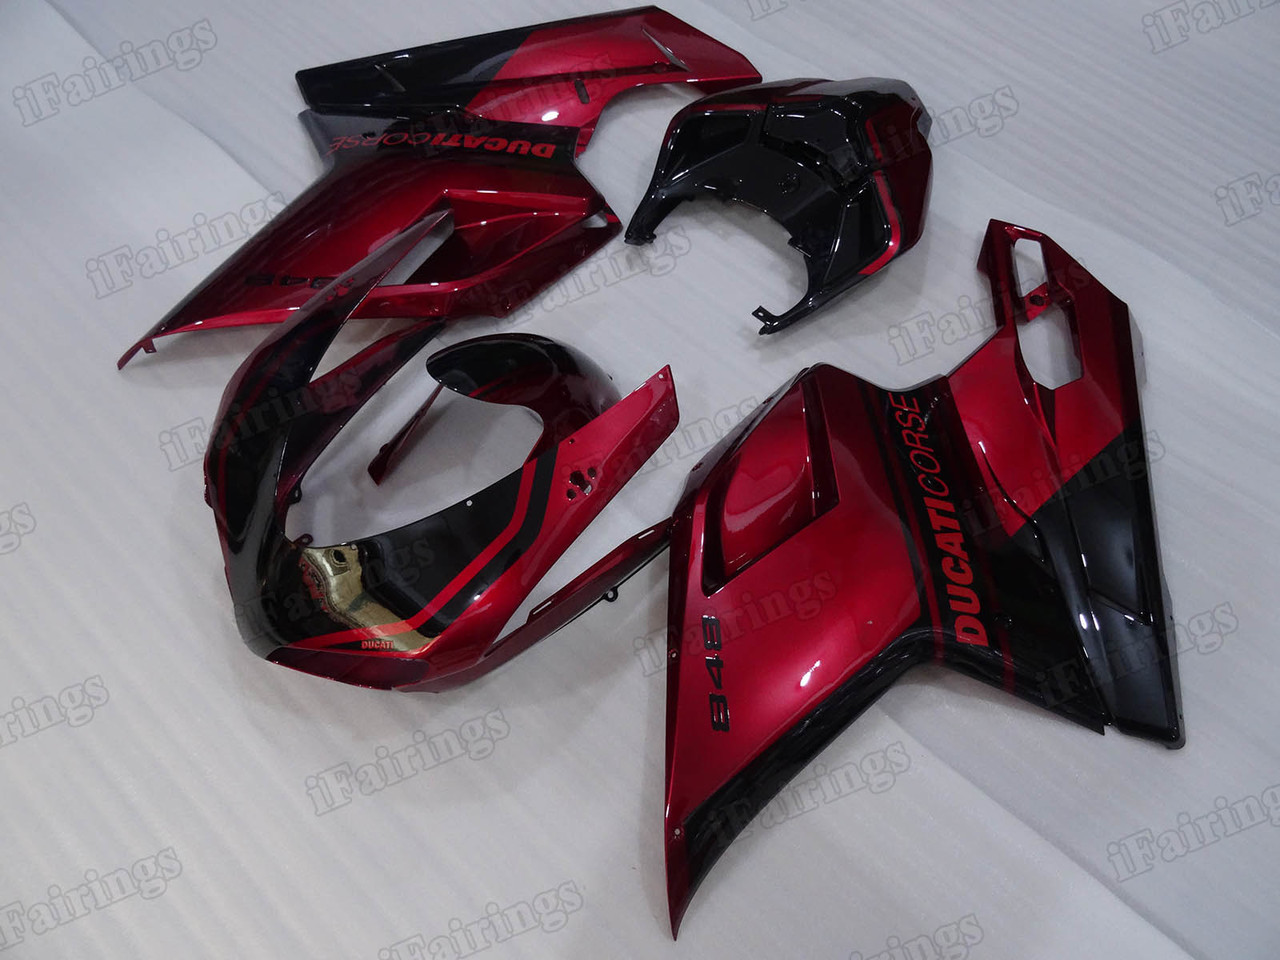 Motorcycle fairings/bodywork for Ducati 848/1098/1198 red and black. - Click Image to Close